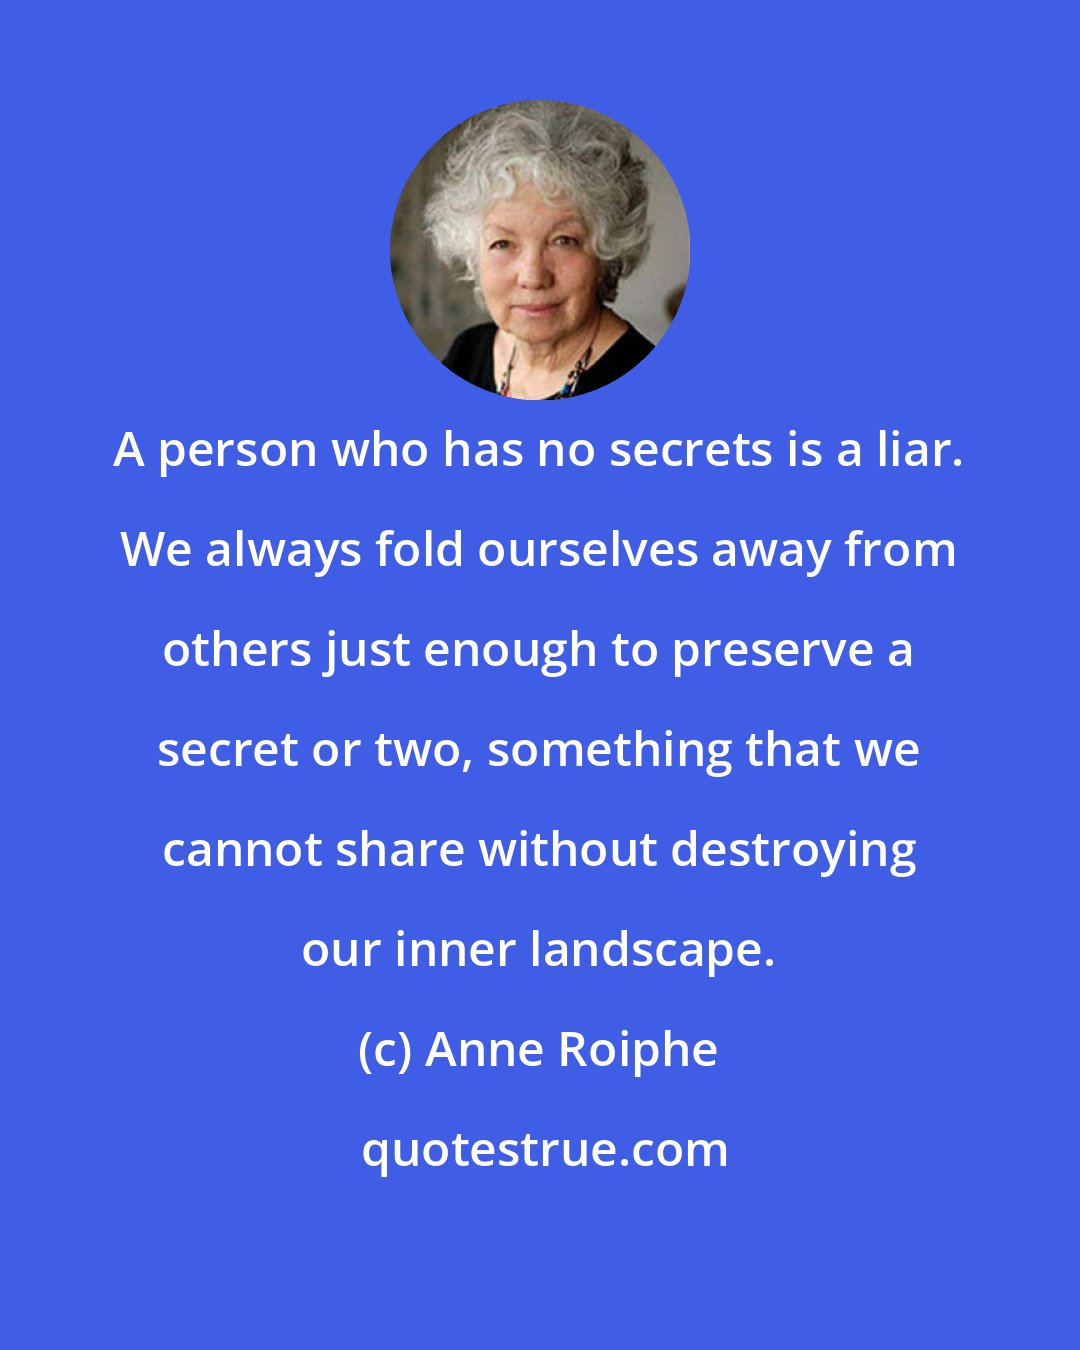 Anne Roiphe: A person who has no secrets is a liar. We always fold ourselves away from others just enough to preserve a secret or two, something that we cannot share without destroying our inner landscape.